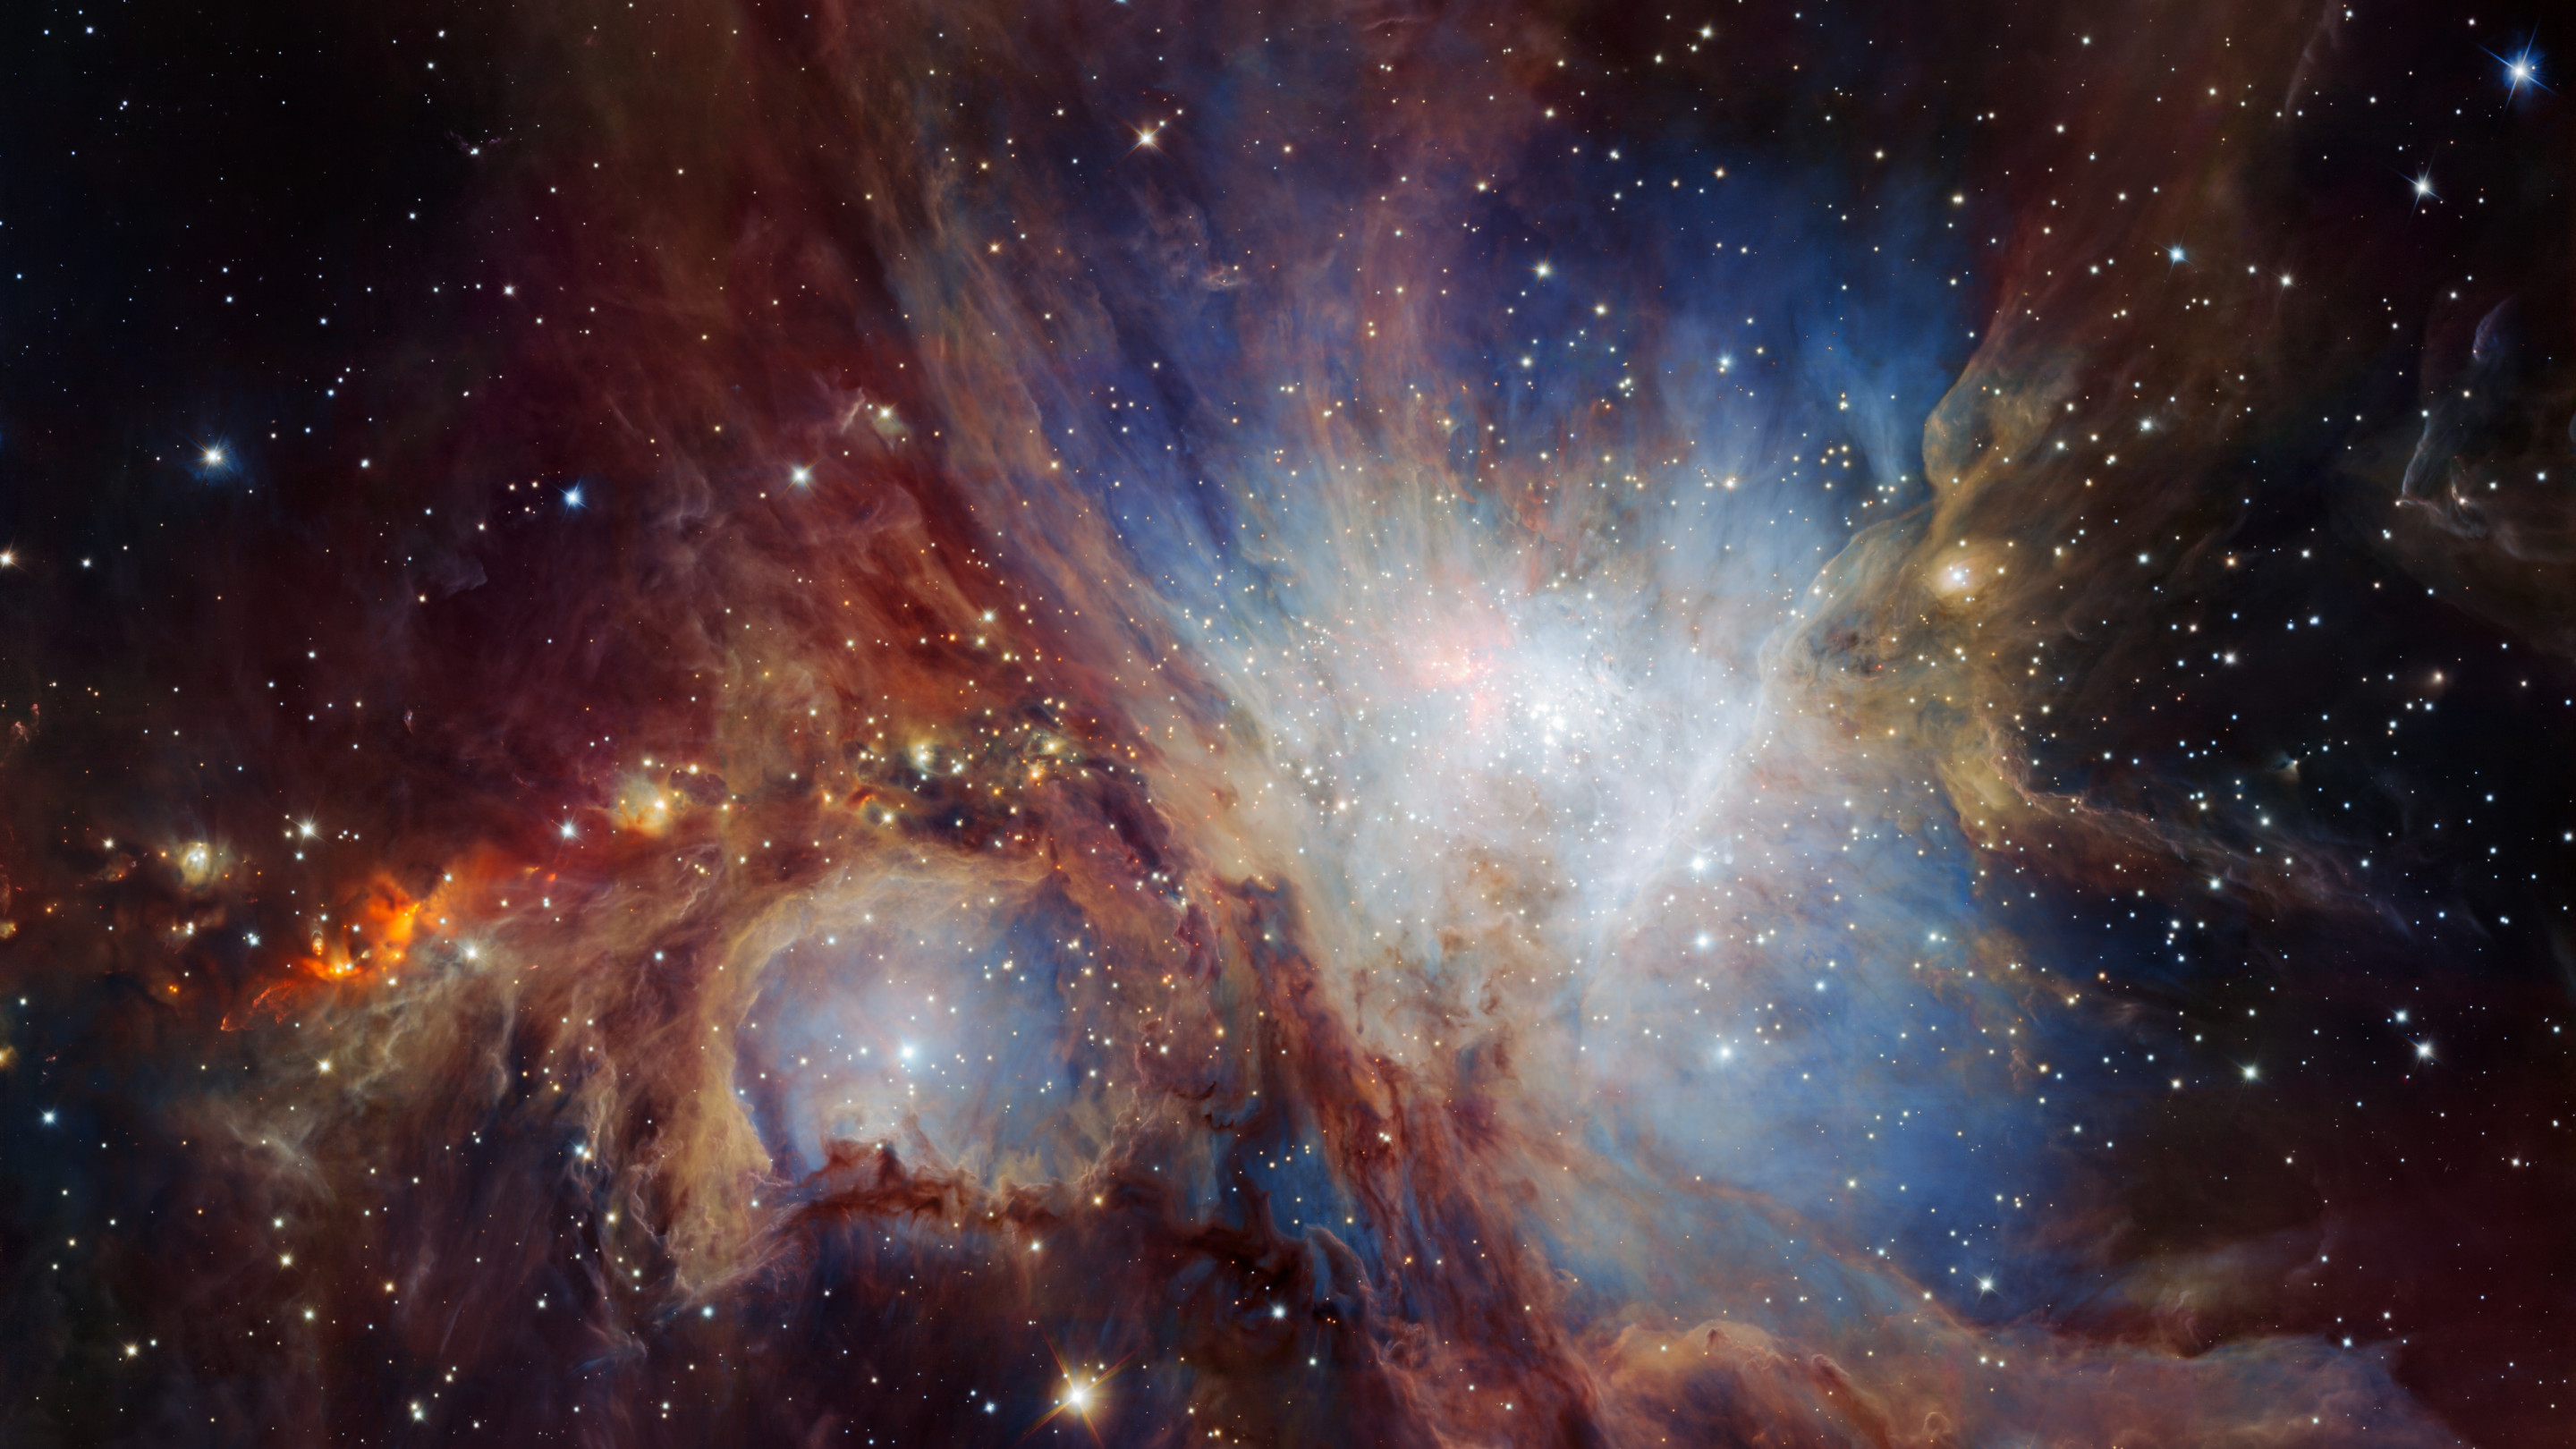 Infrared view of the Orion Nebula wallpaper 2880x1620